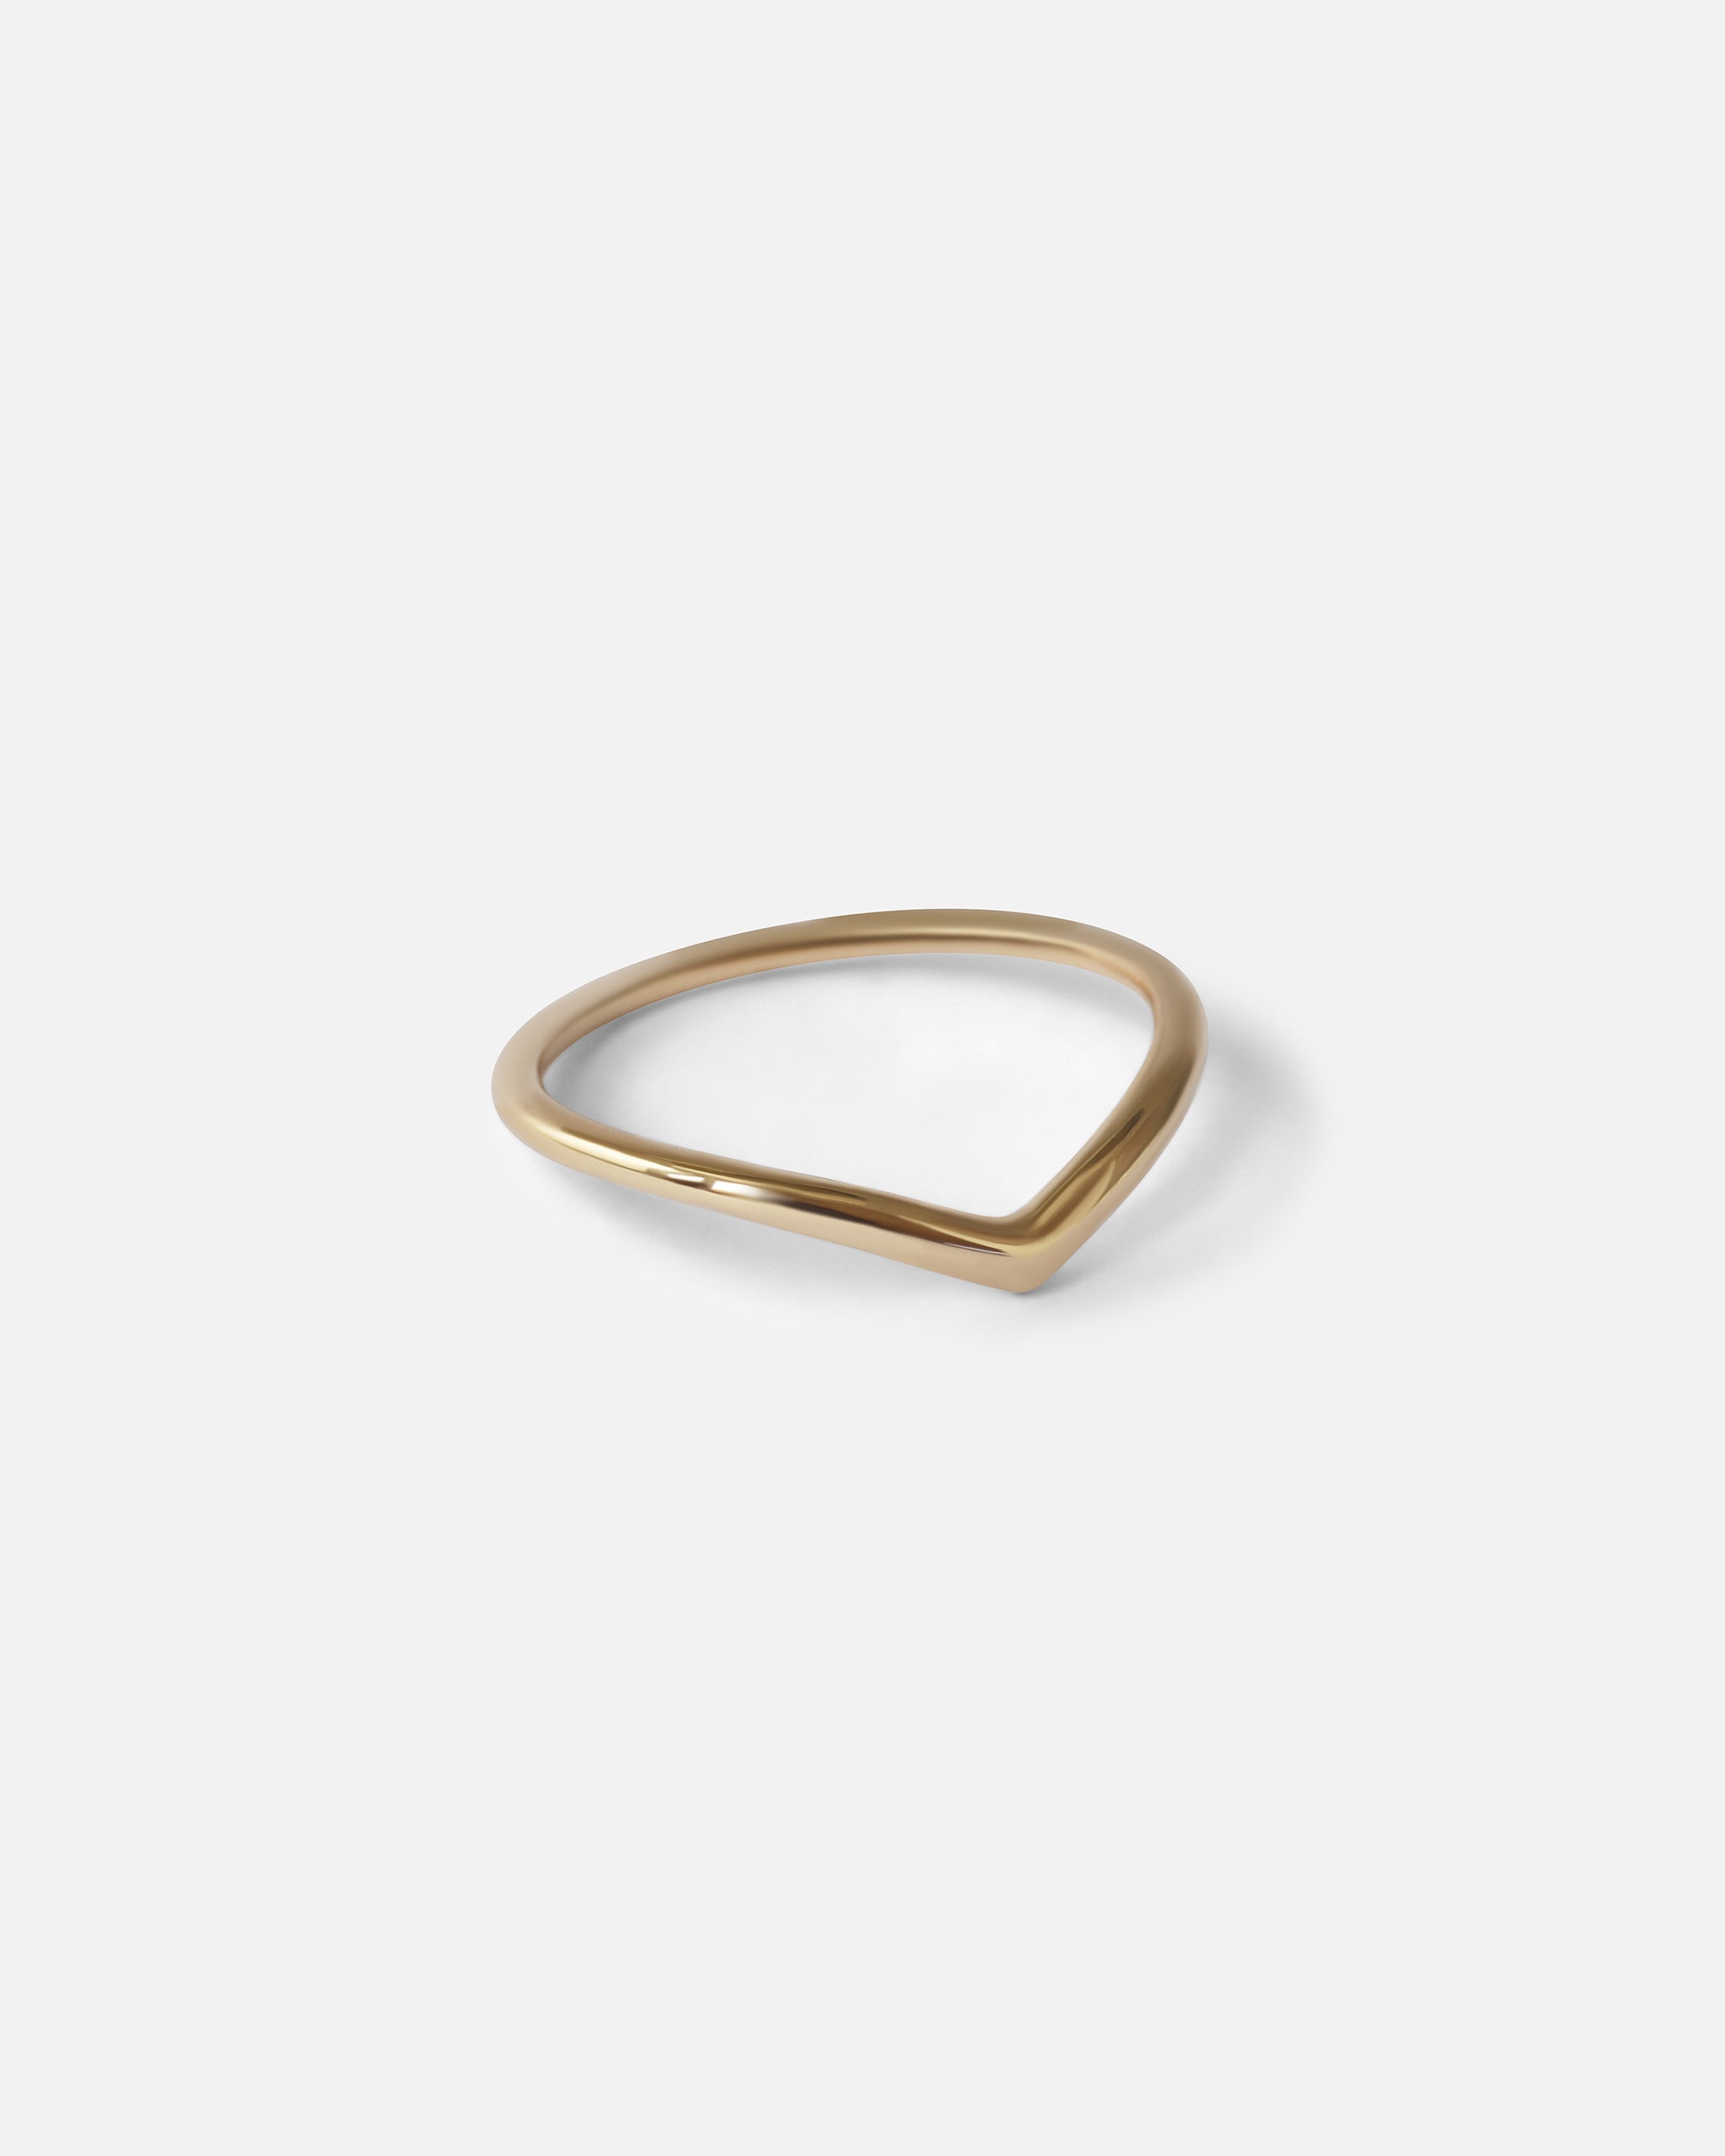 Archer / Ring Made To Order 14k Yellow Gold State At Checkout By Katrina La Penne in rings Category